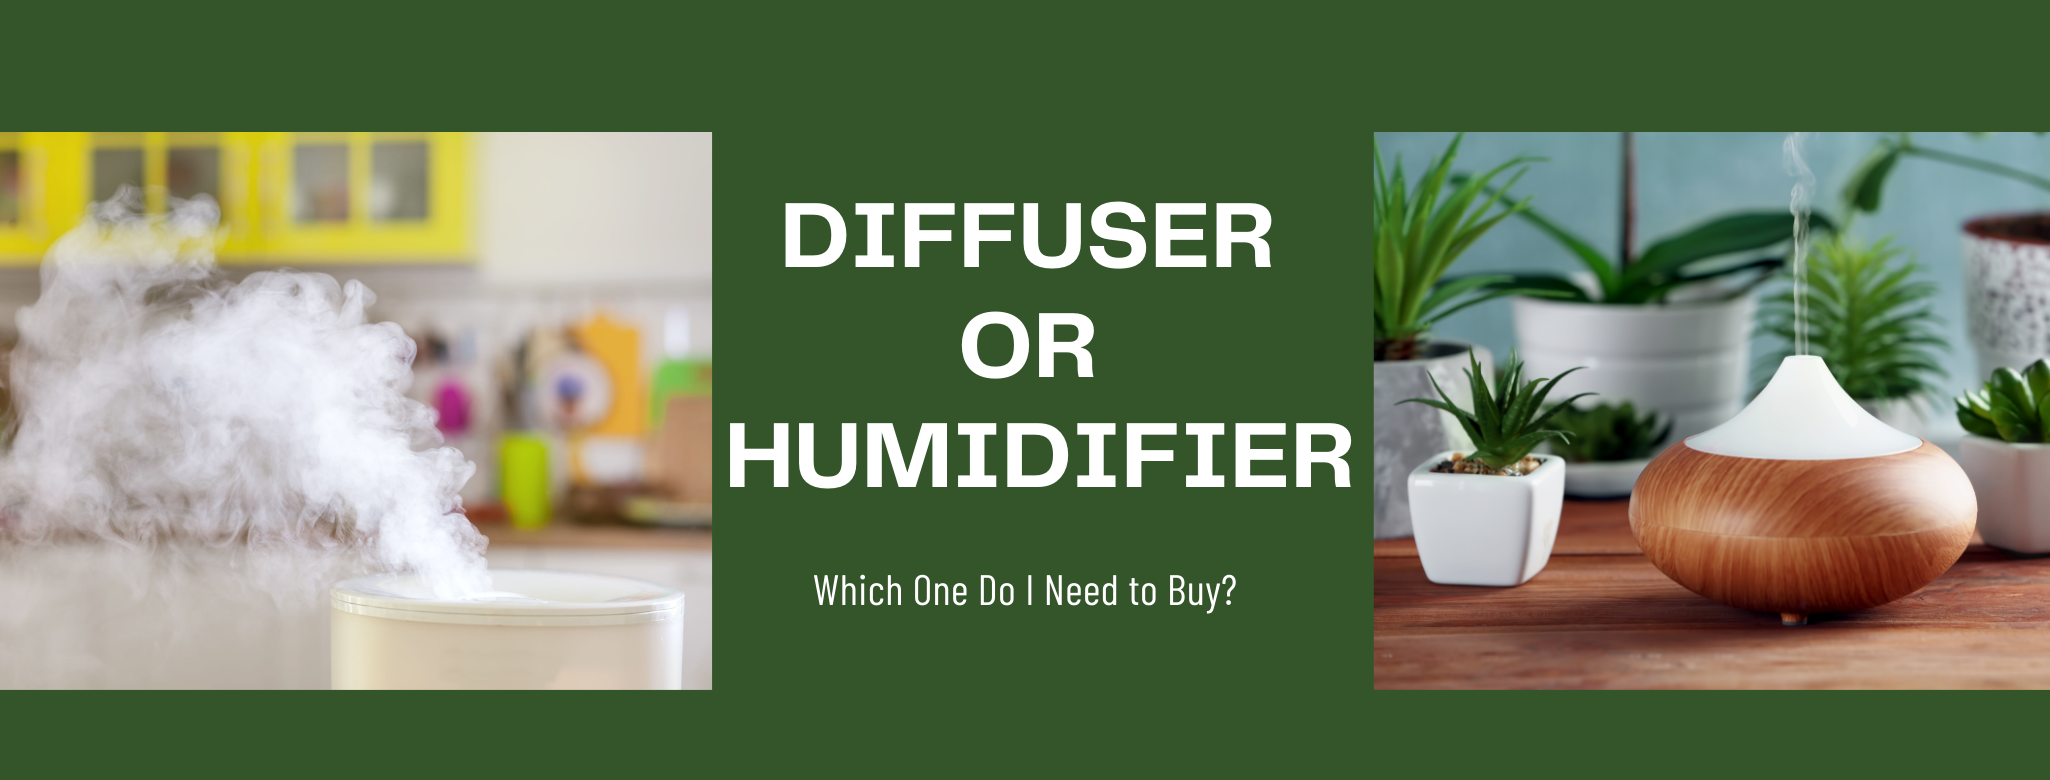 Diffuser or Humidifier, Which One Do I Need to Buy